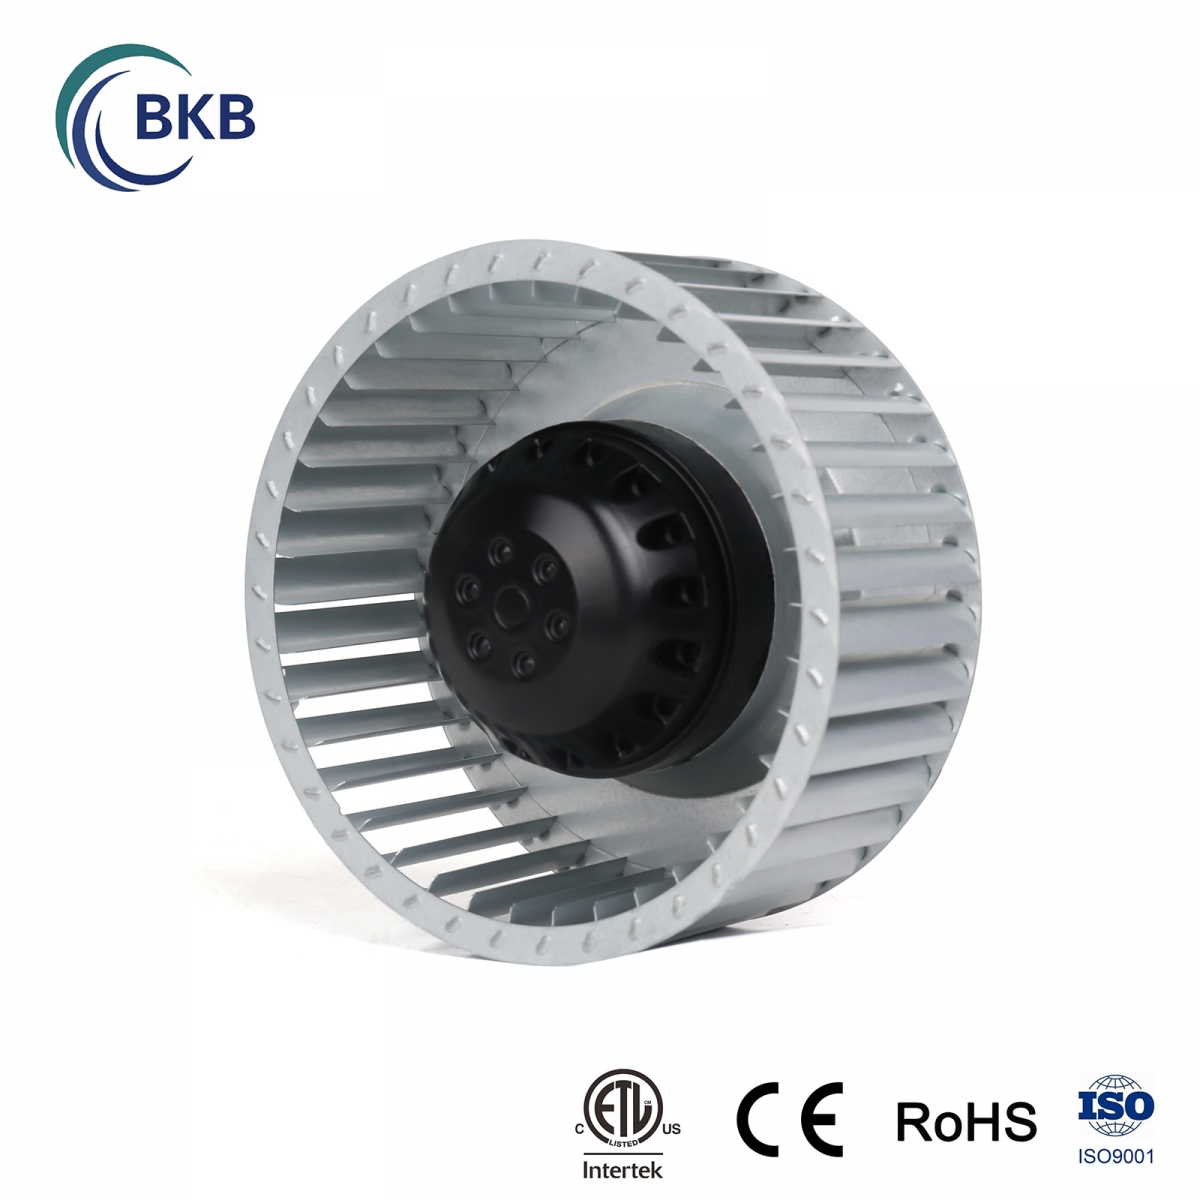 Steel forward curved centrifugal fan φ 146 BFB-2E146  supplied by Manufacturer in China-SUNLIGHT BLOWER,Centrifugal Fans, Inline Fans,Motors,Backward curved centrifugal fans ,Forward curved centrifugal fans ,inlet fans, EC fans